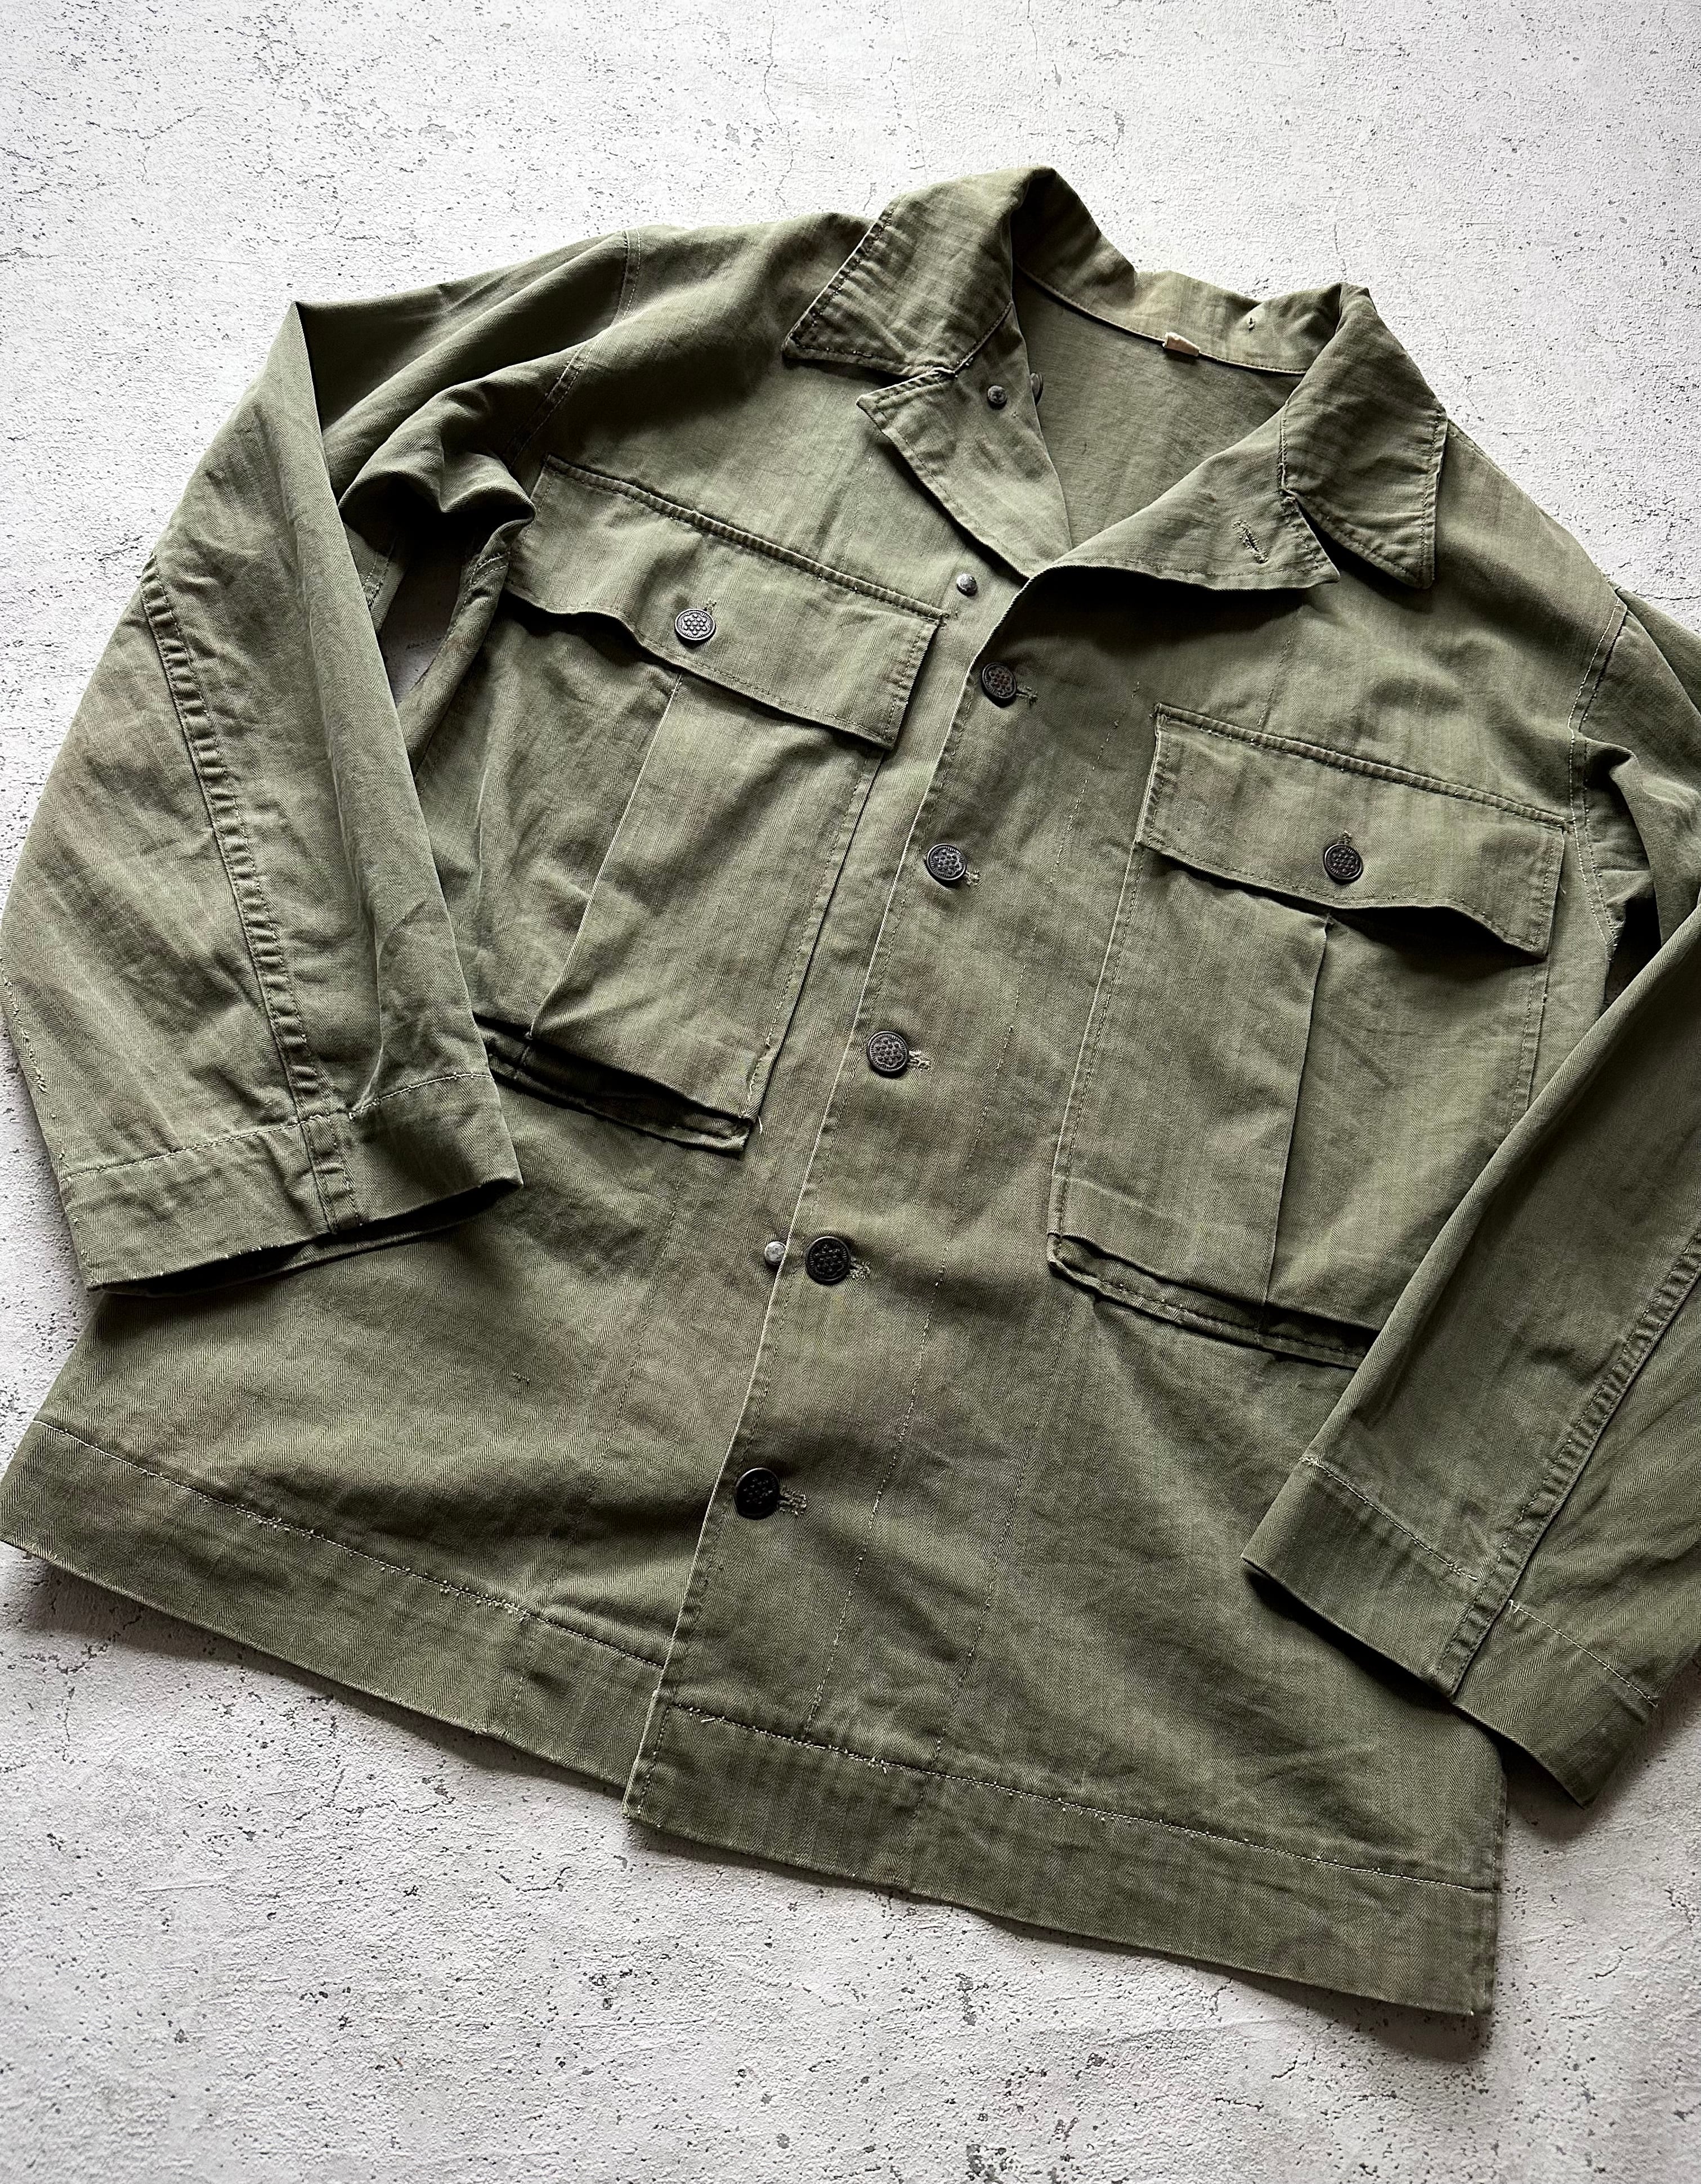 40s US.ARMY / M-43 HBT JACKET 13-STAR OLD MILITARY VINTAGE 米軍 ...